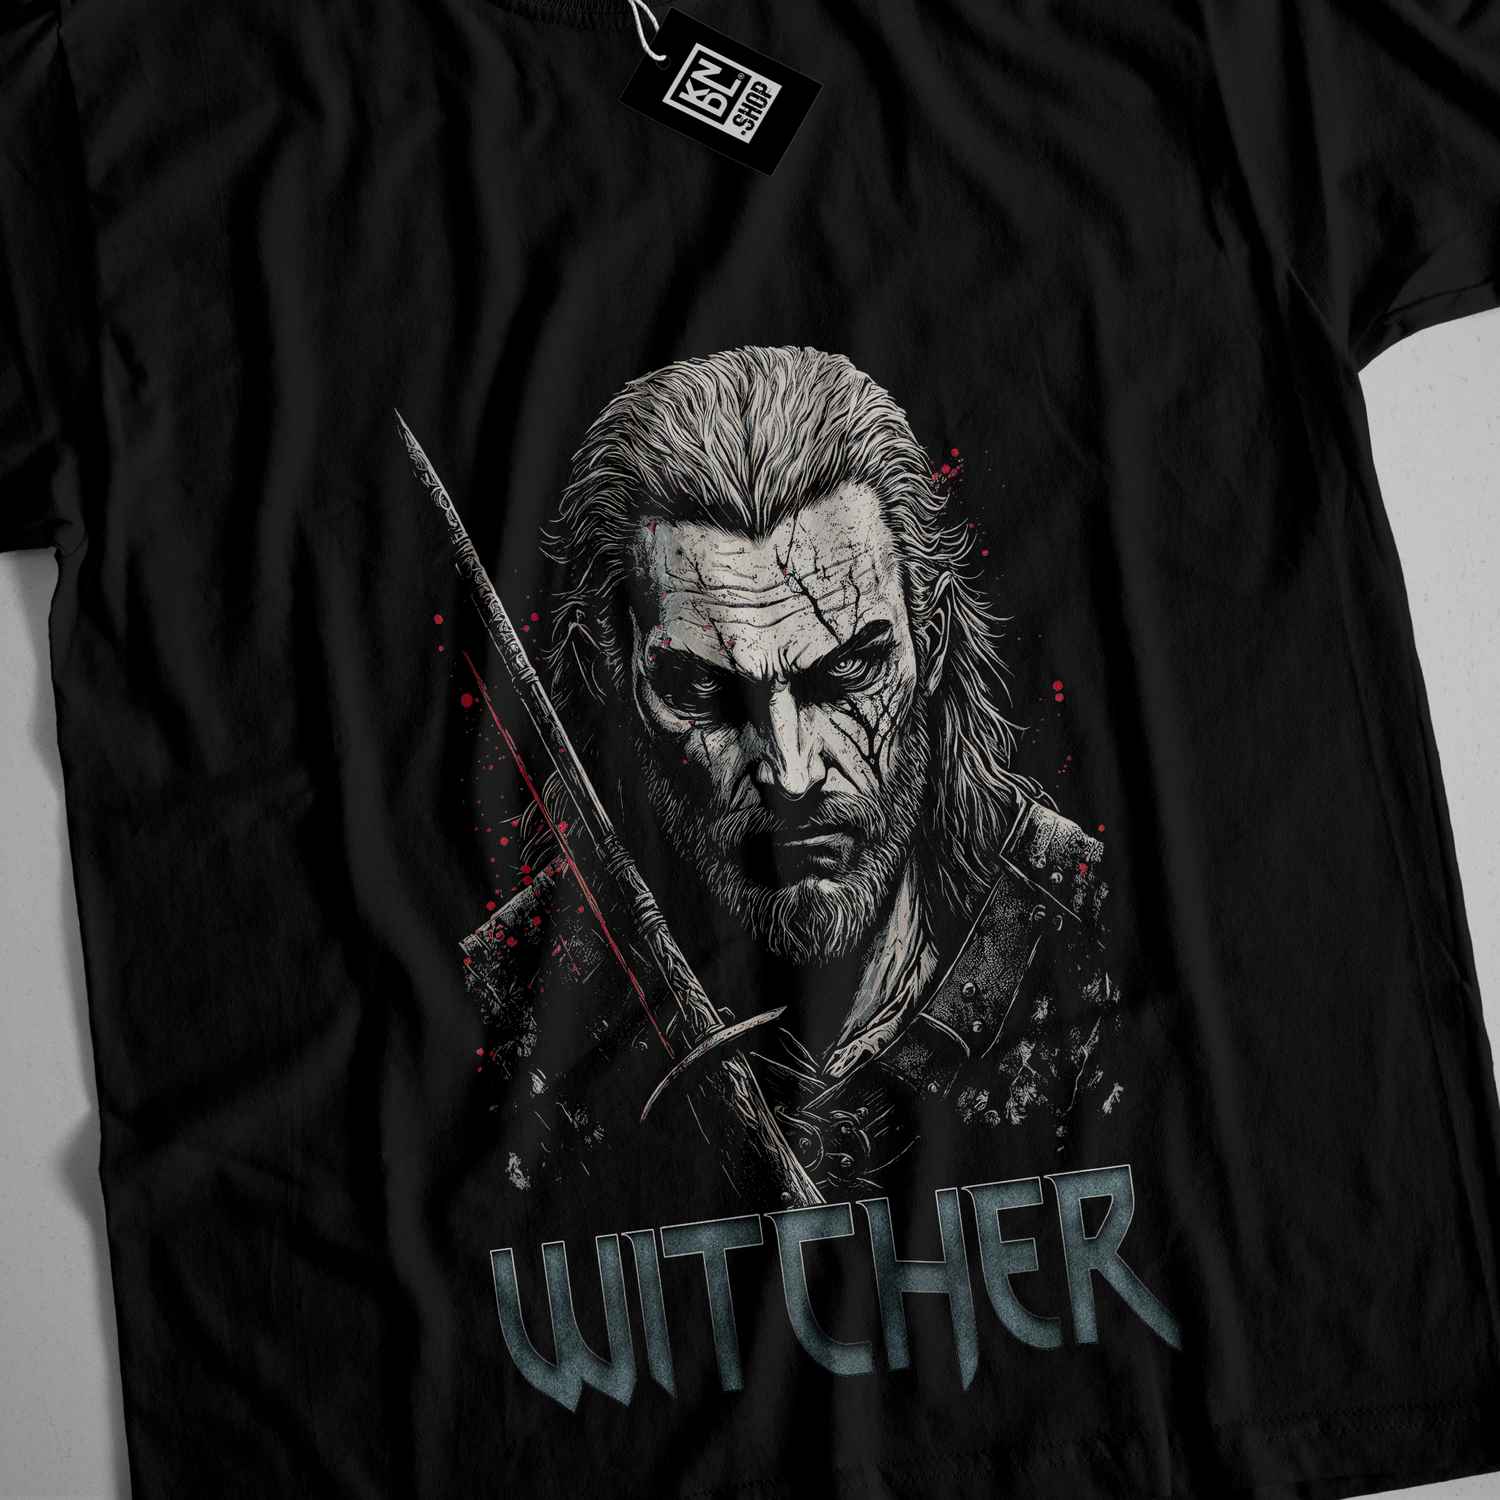 a black t - shirt with a picture of a man holding a sword